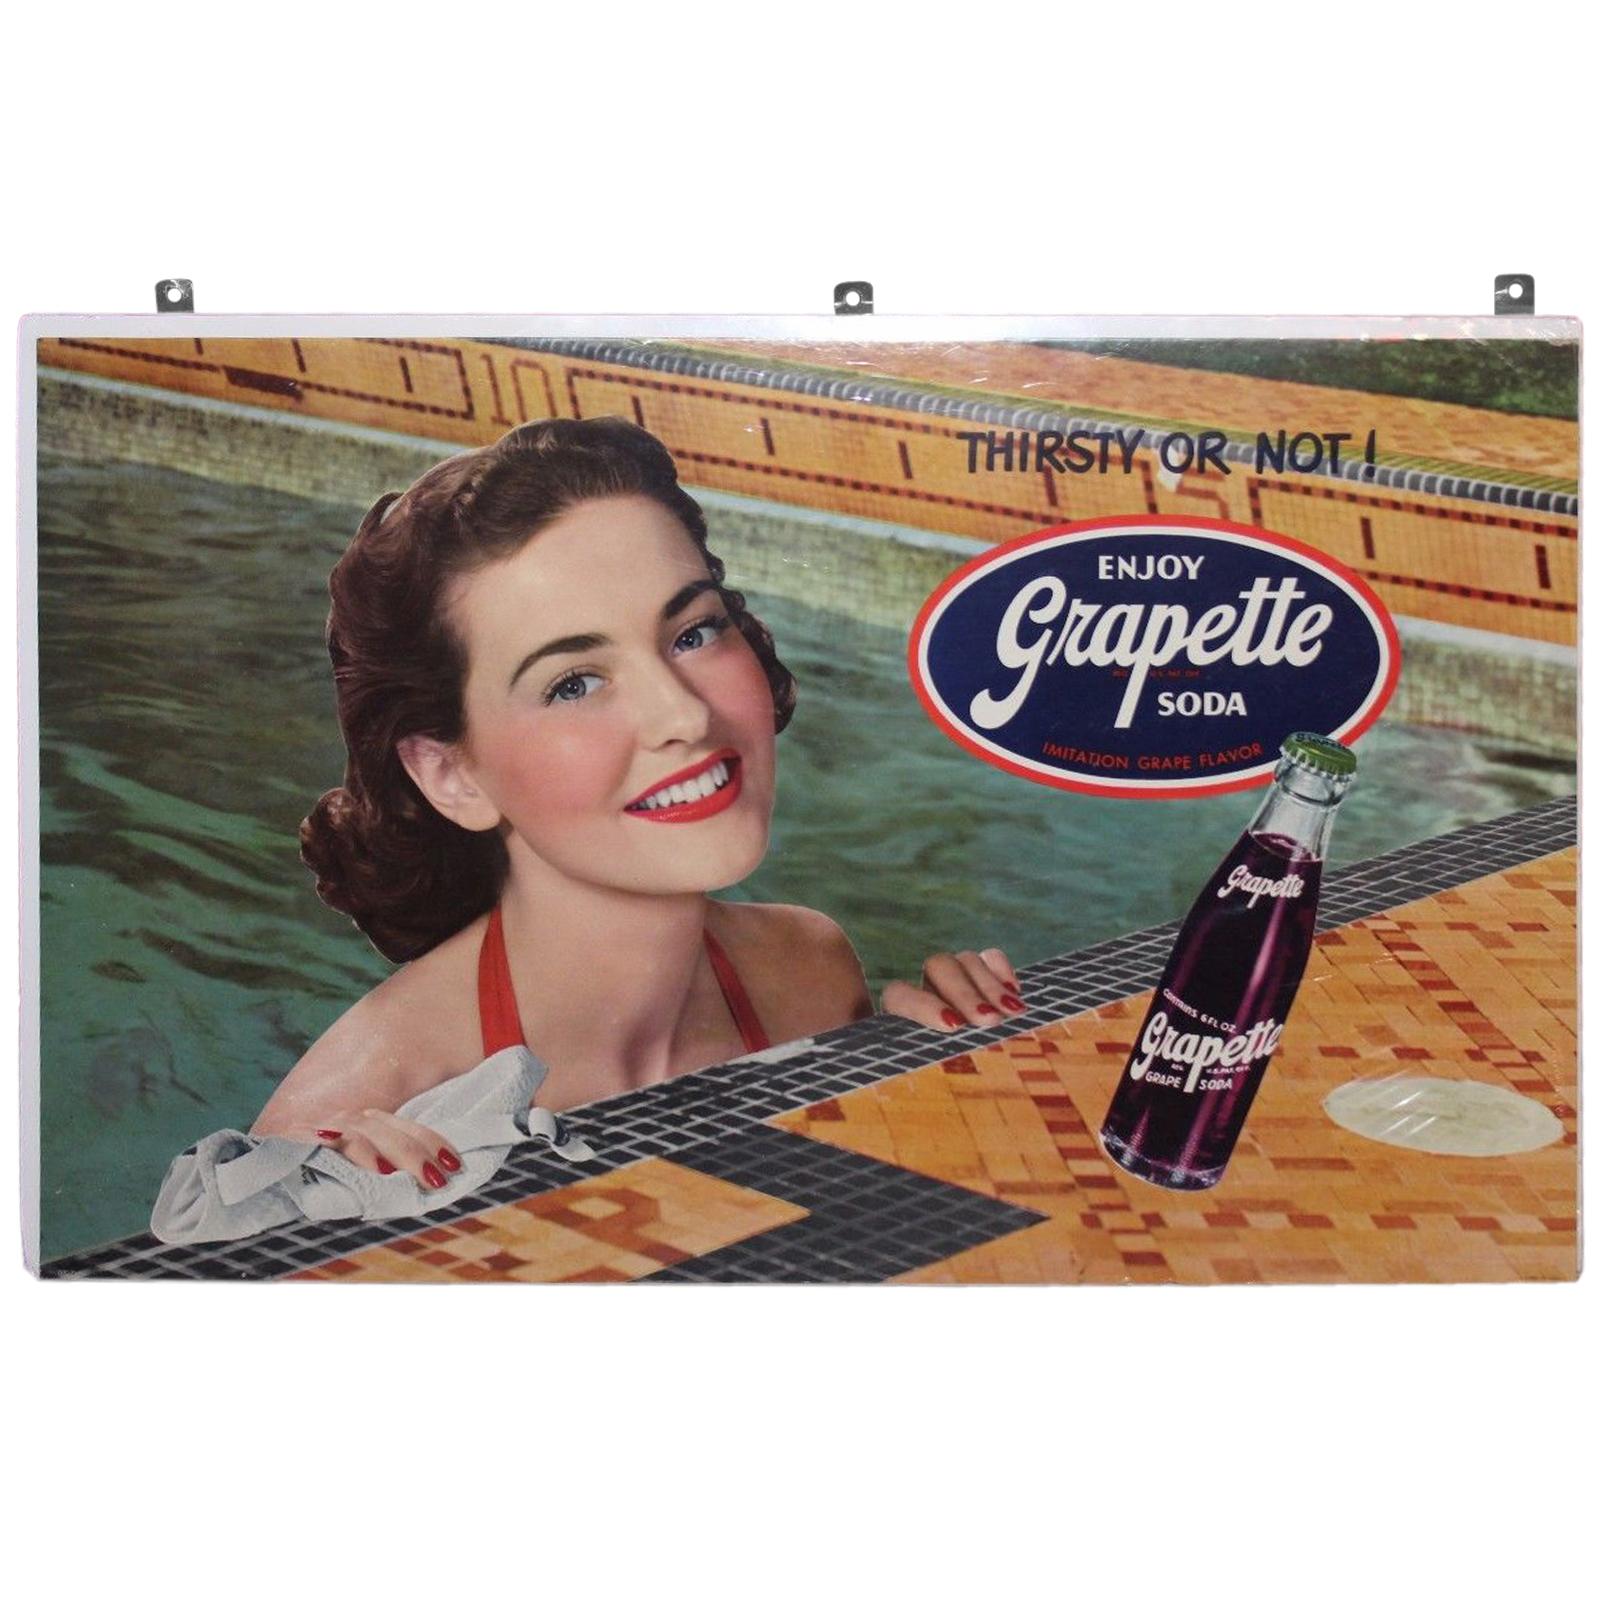 Vintage 1940s Grapette Soda Lithograph Cardboard Advertising For Sale